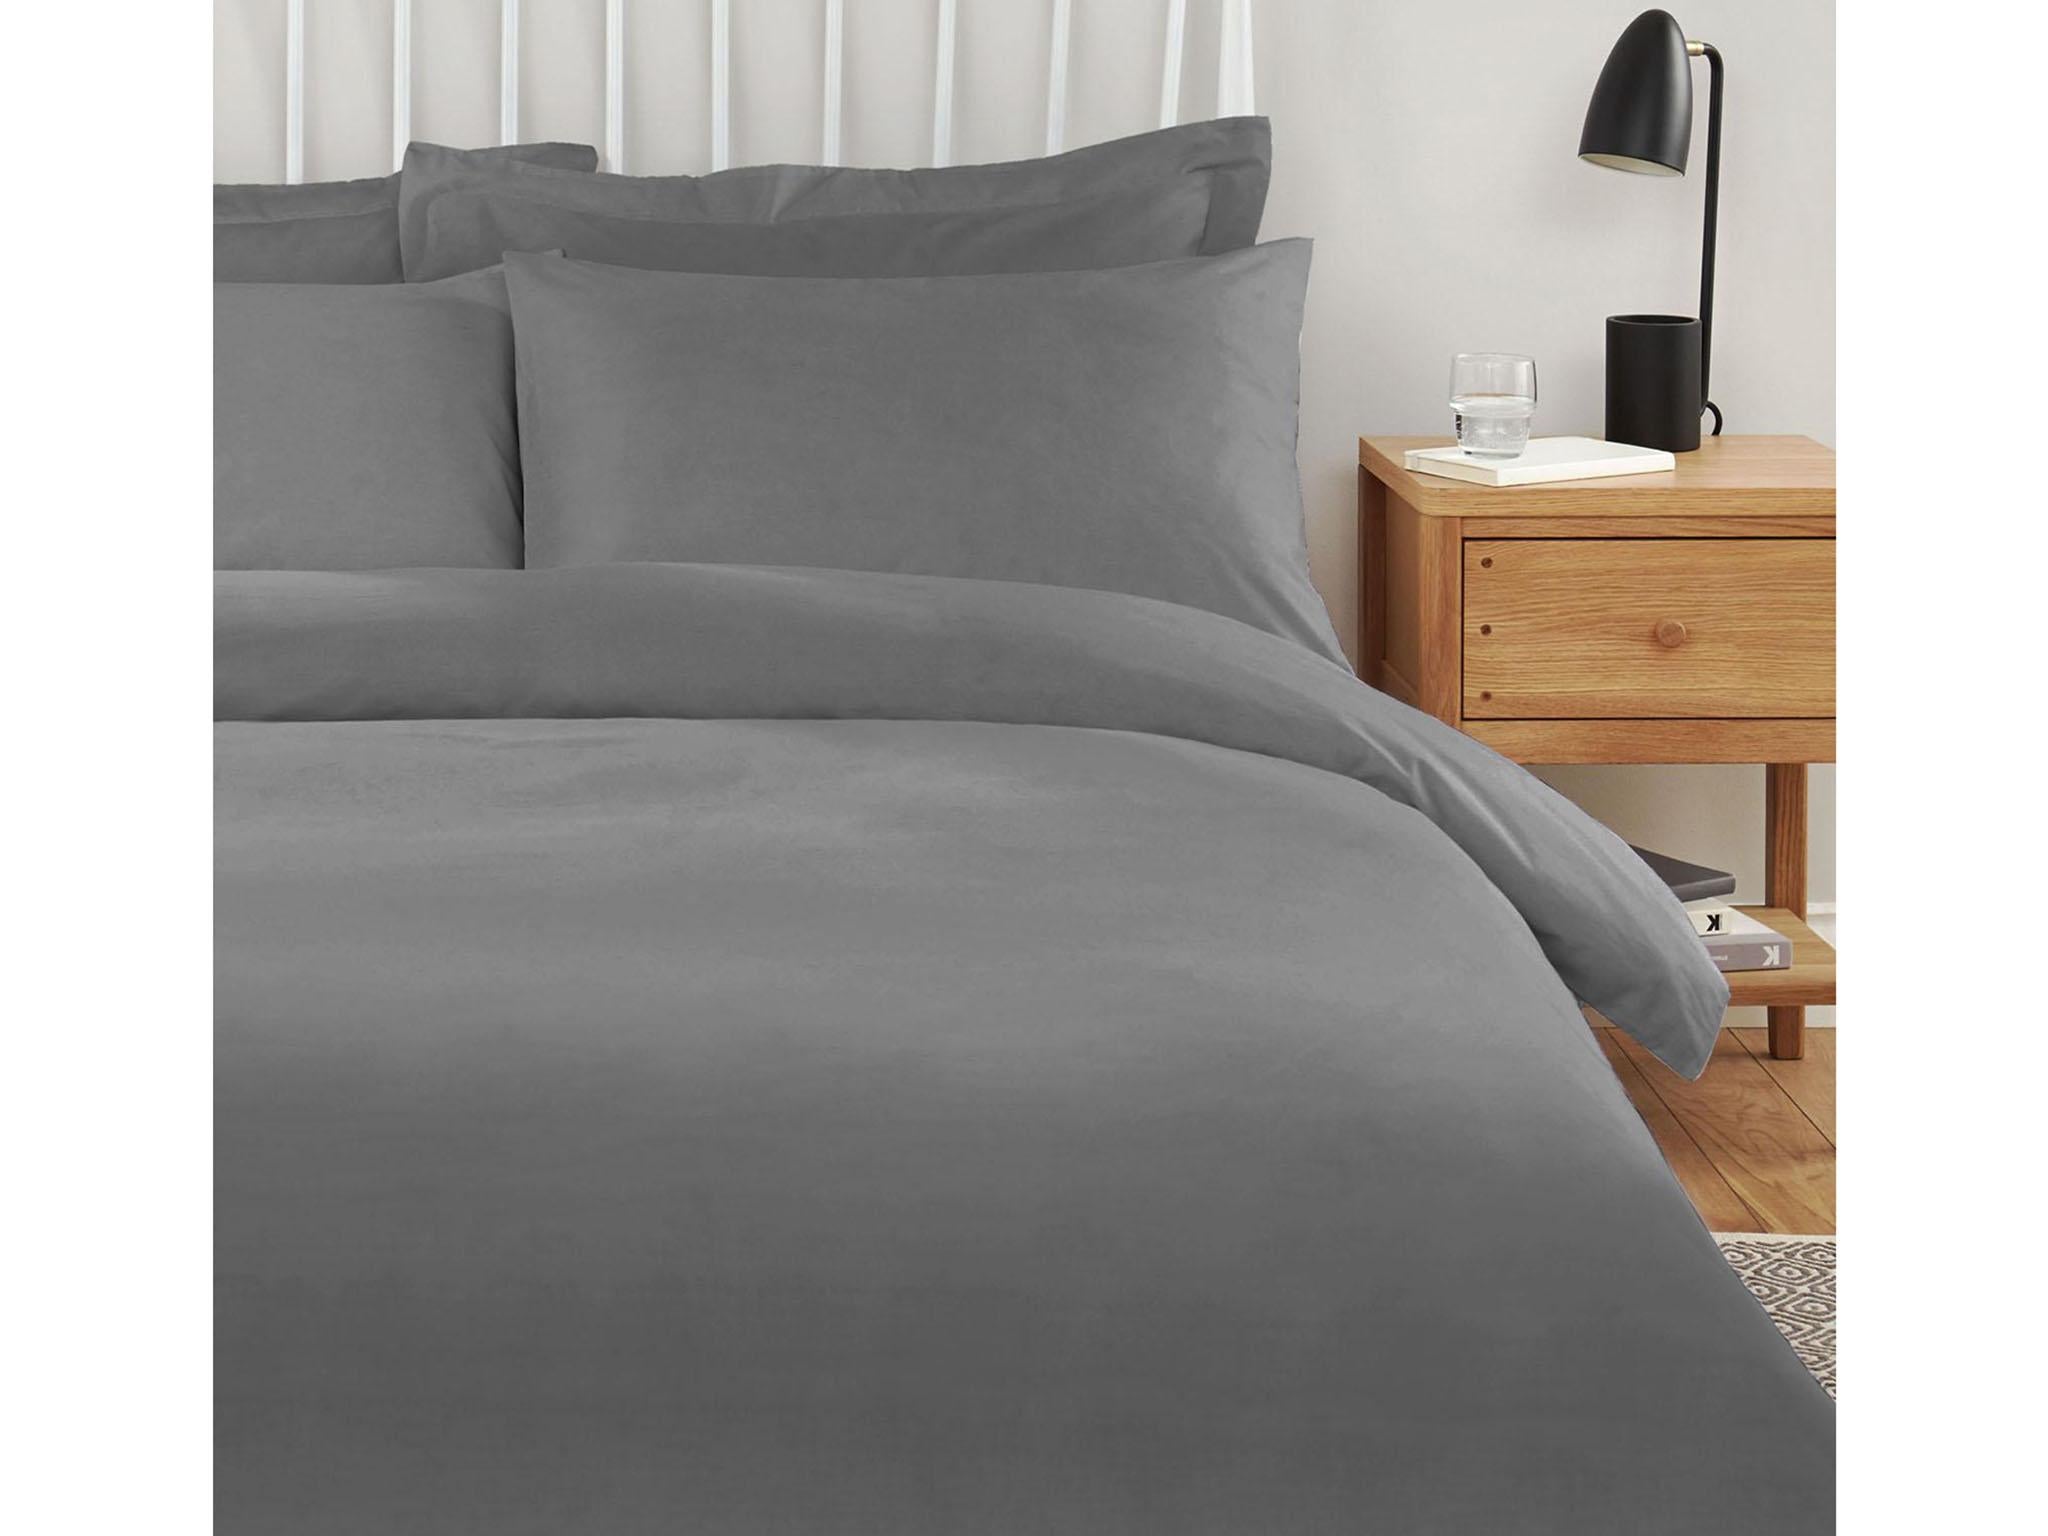 Best Single Bedding Sets For Students That Are Cheap And Durable